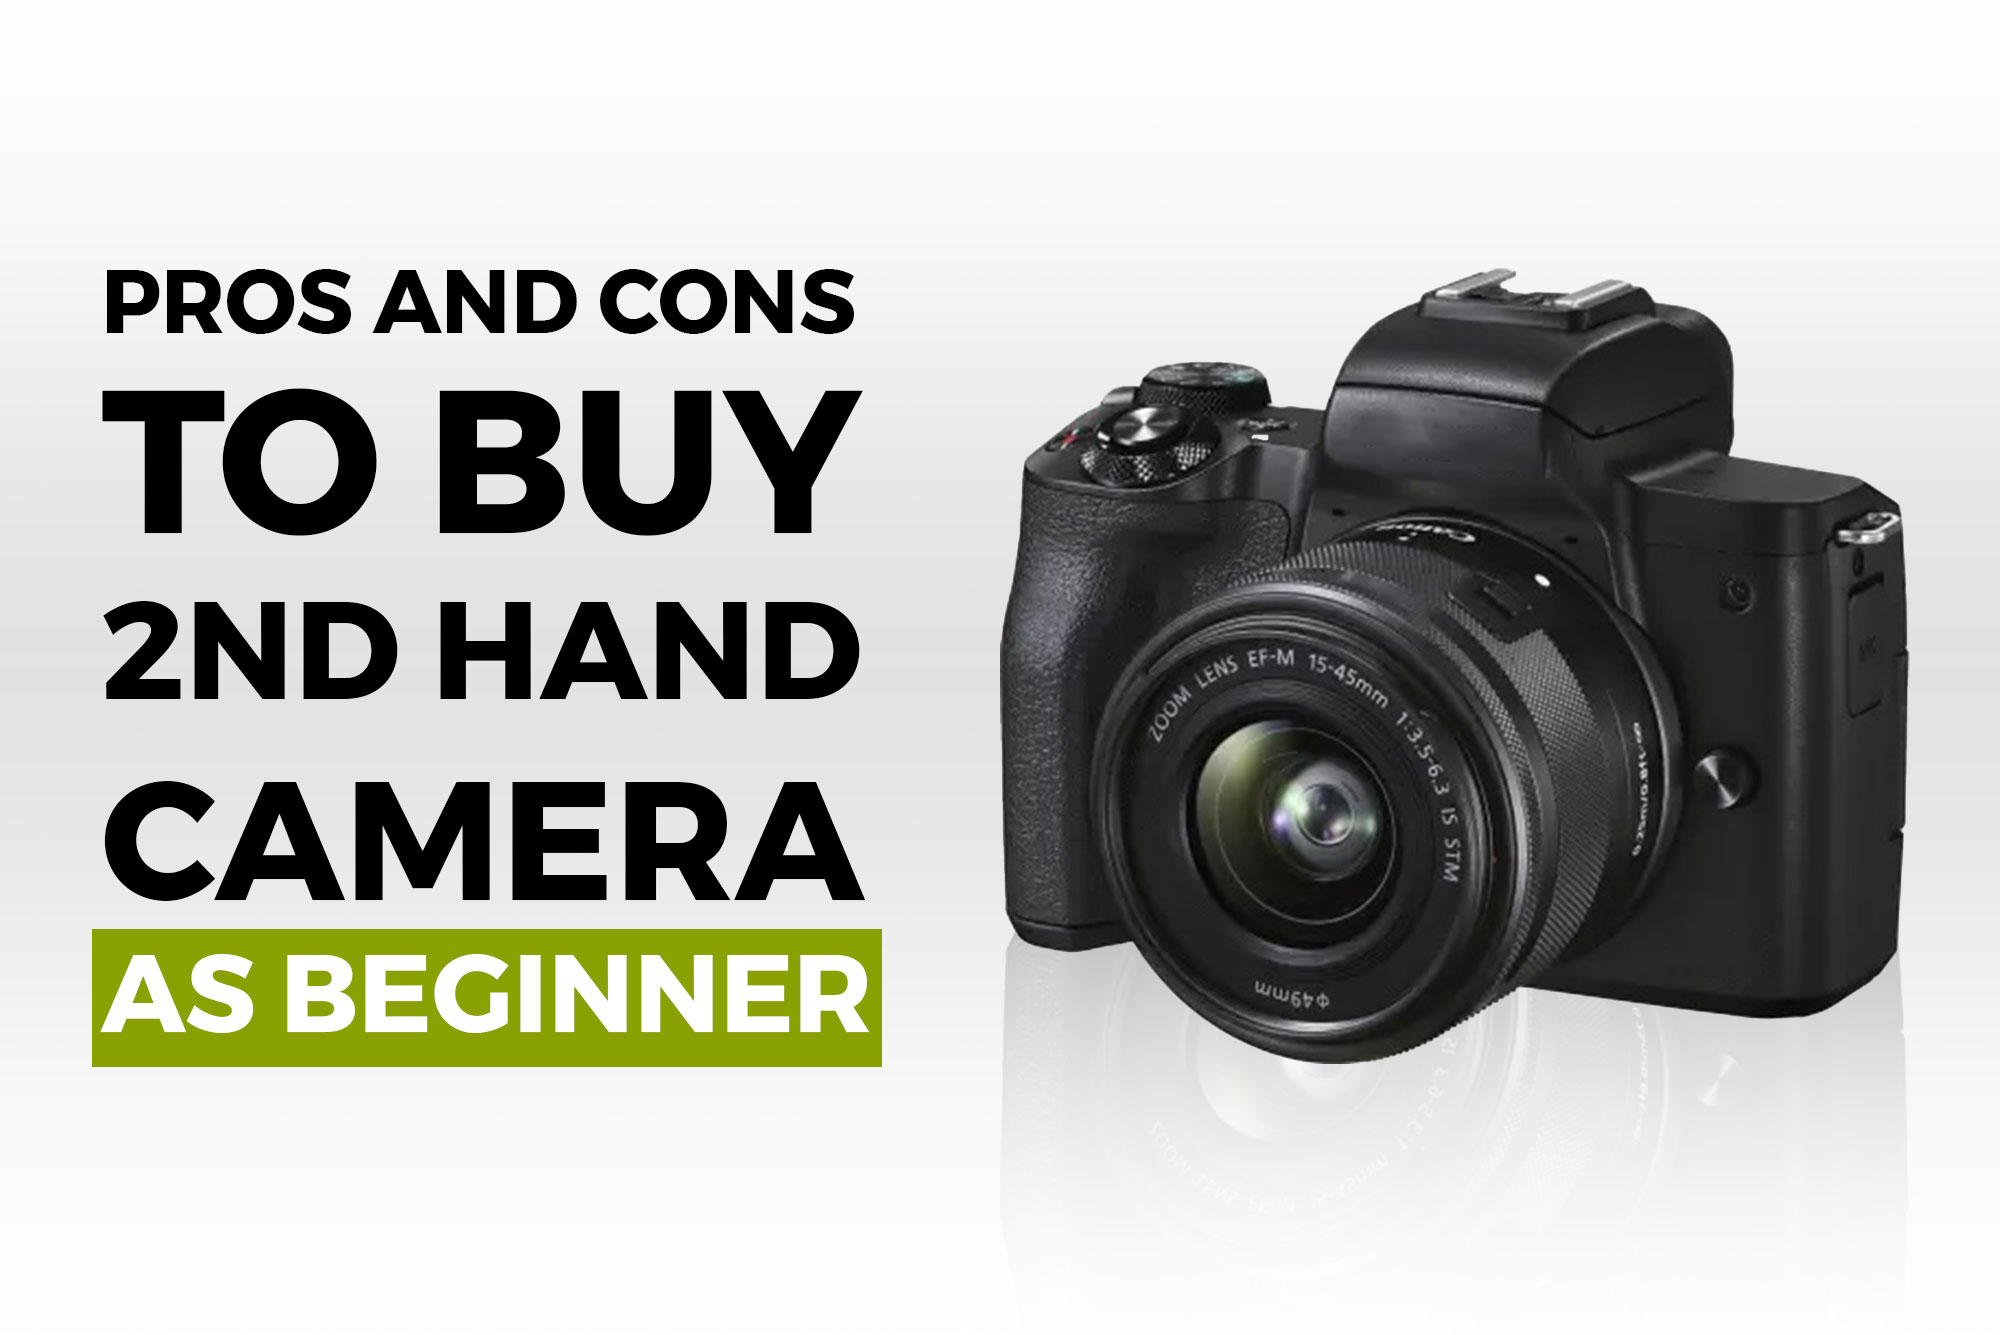 Pros and Cons to buy 2nd hand camera as beginner